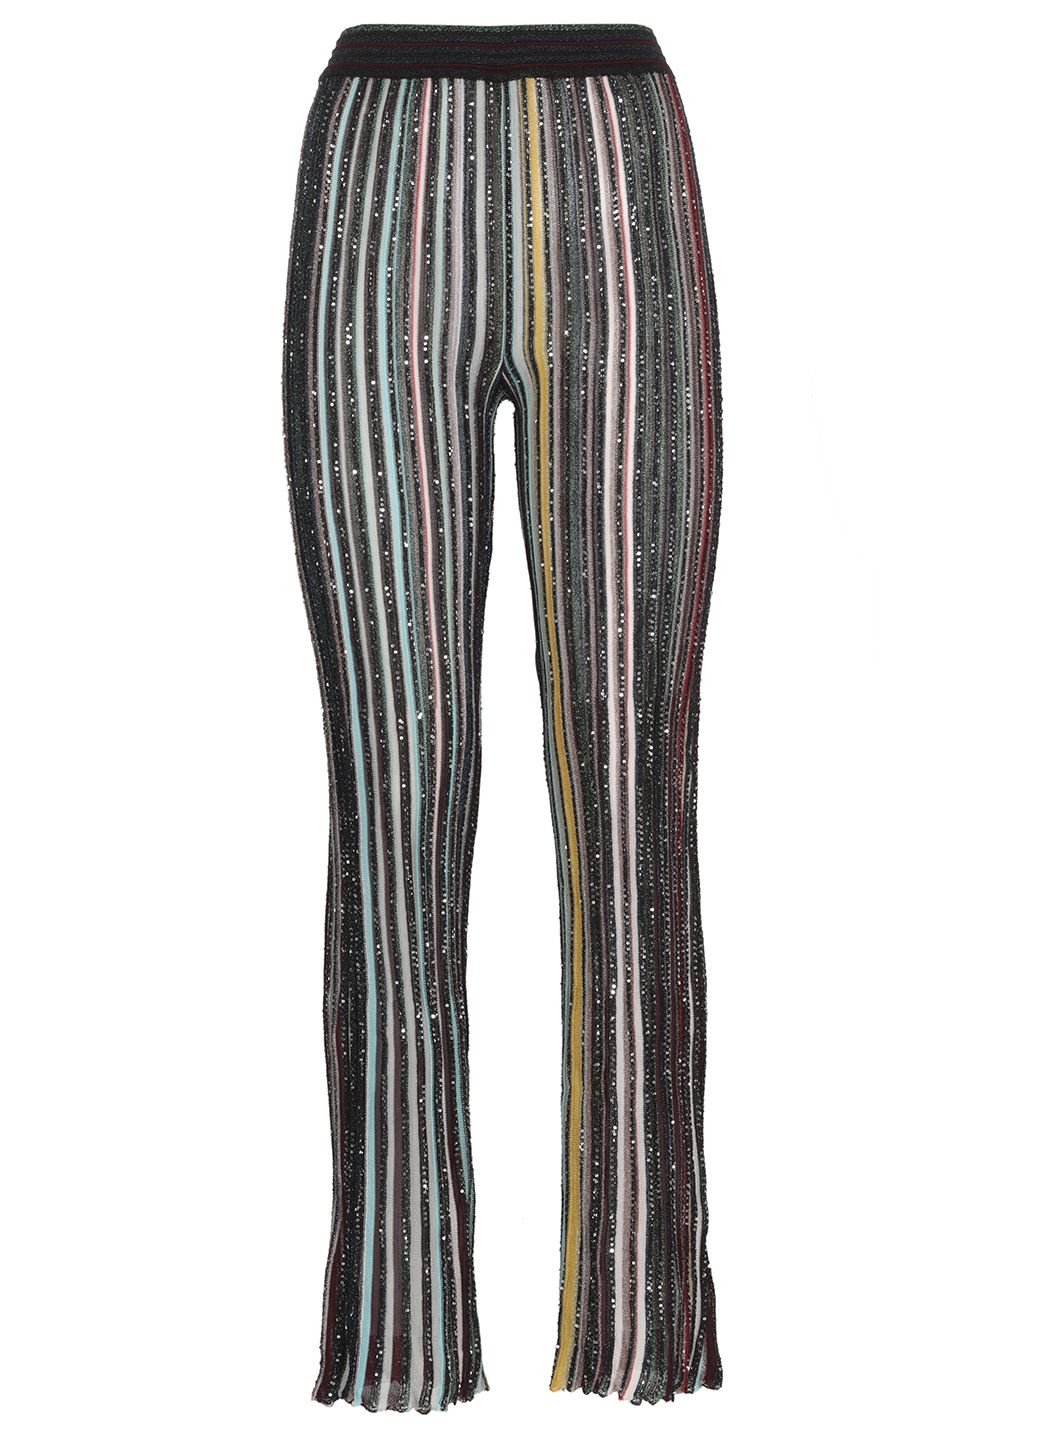 Striped trousers with sequin